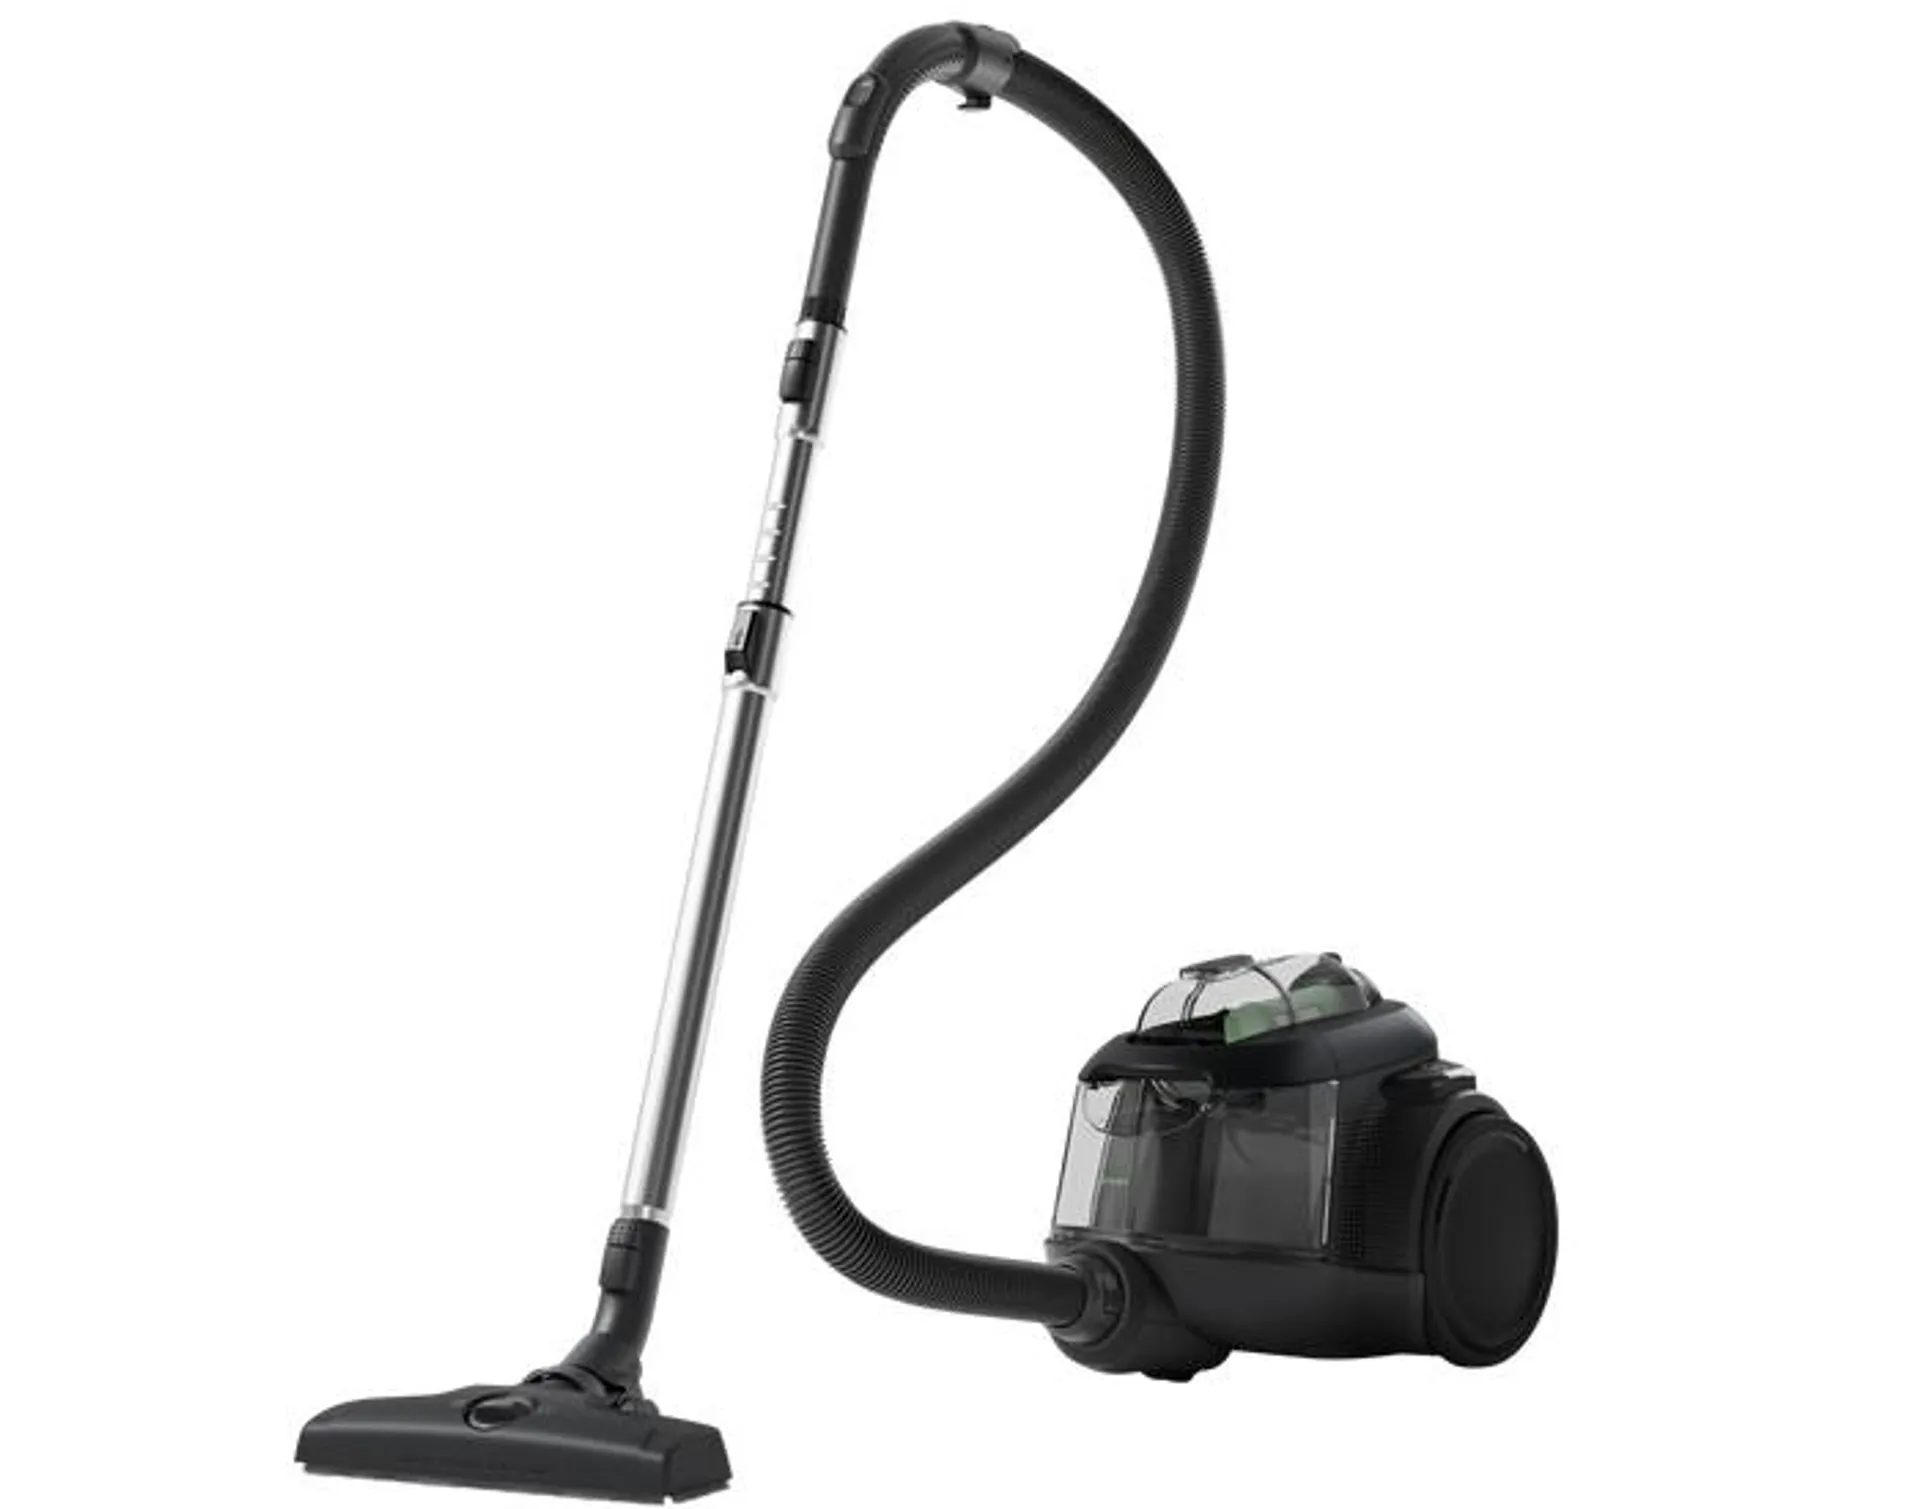 Electrolux Eco UltimateHome 700 Bagless Vacuum Cleaner